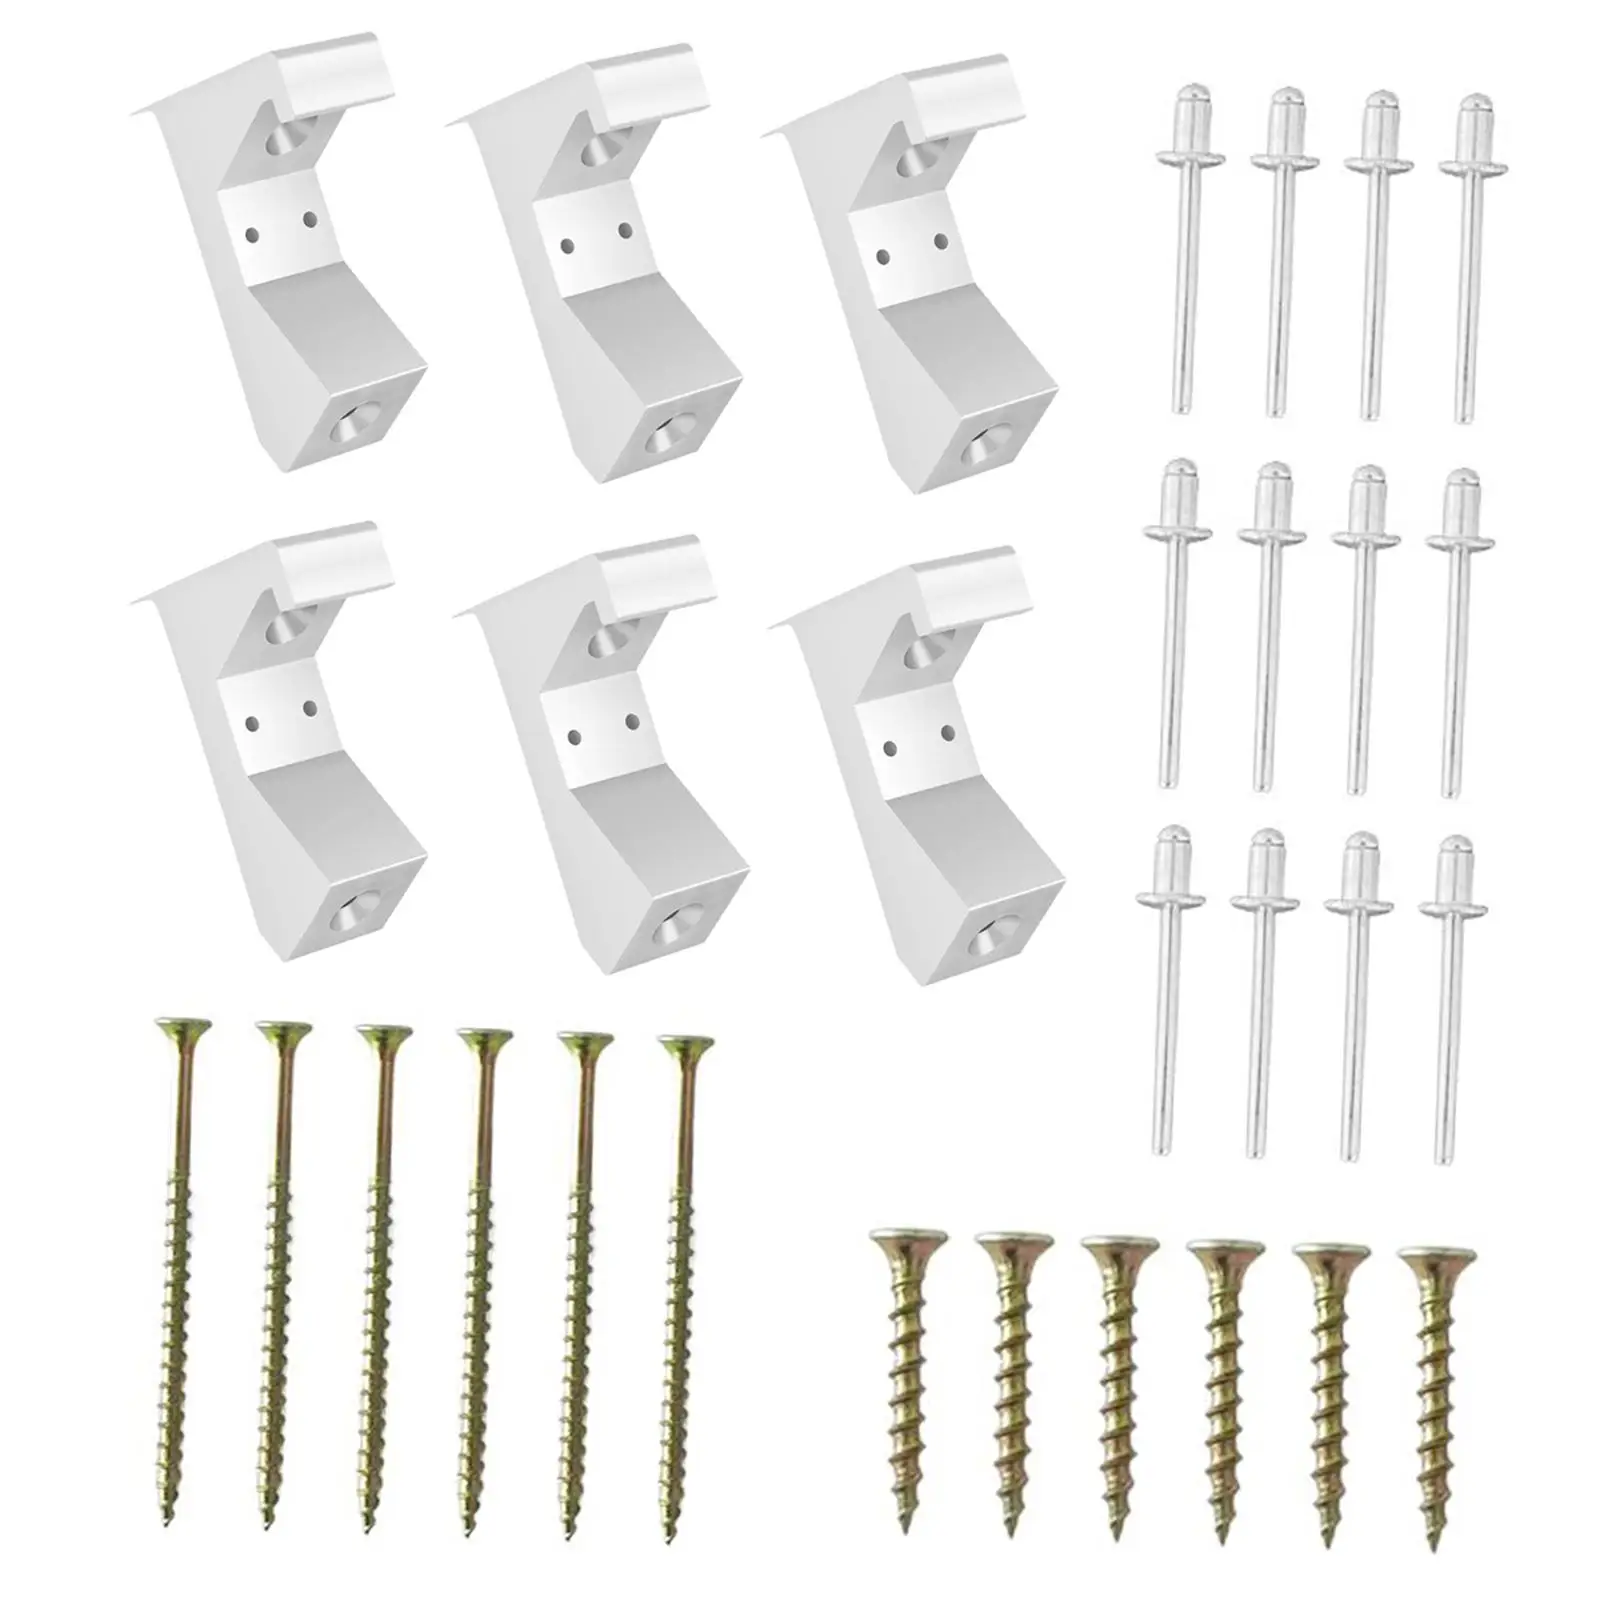 Squeaky Floor Repair Kit Effectively Attach Subfloor to Joists High Quality Floor Repair Tool with Screws Durable sturdy